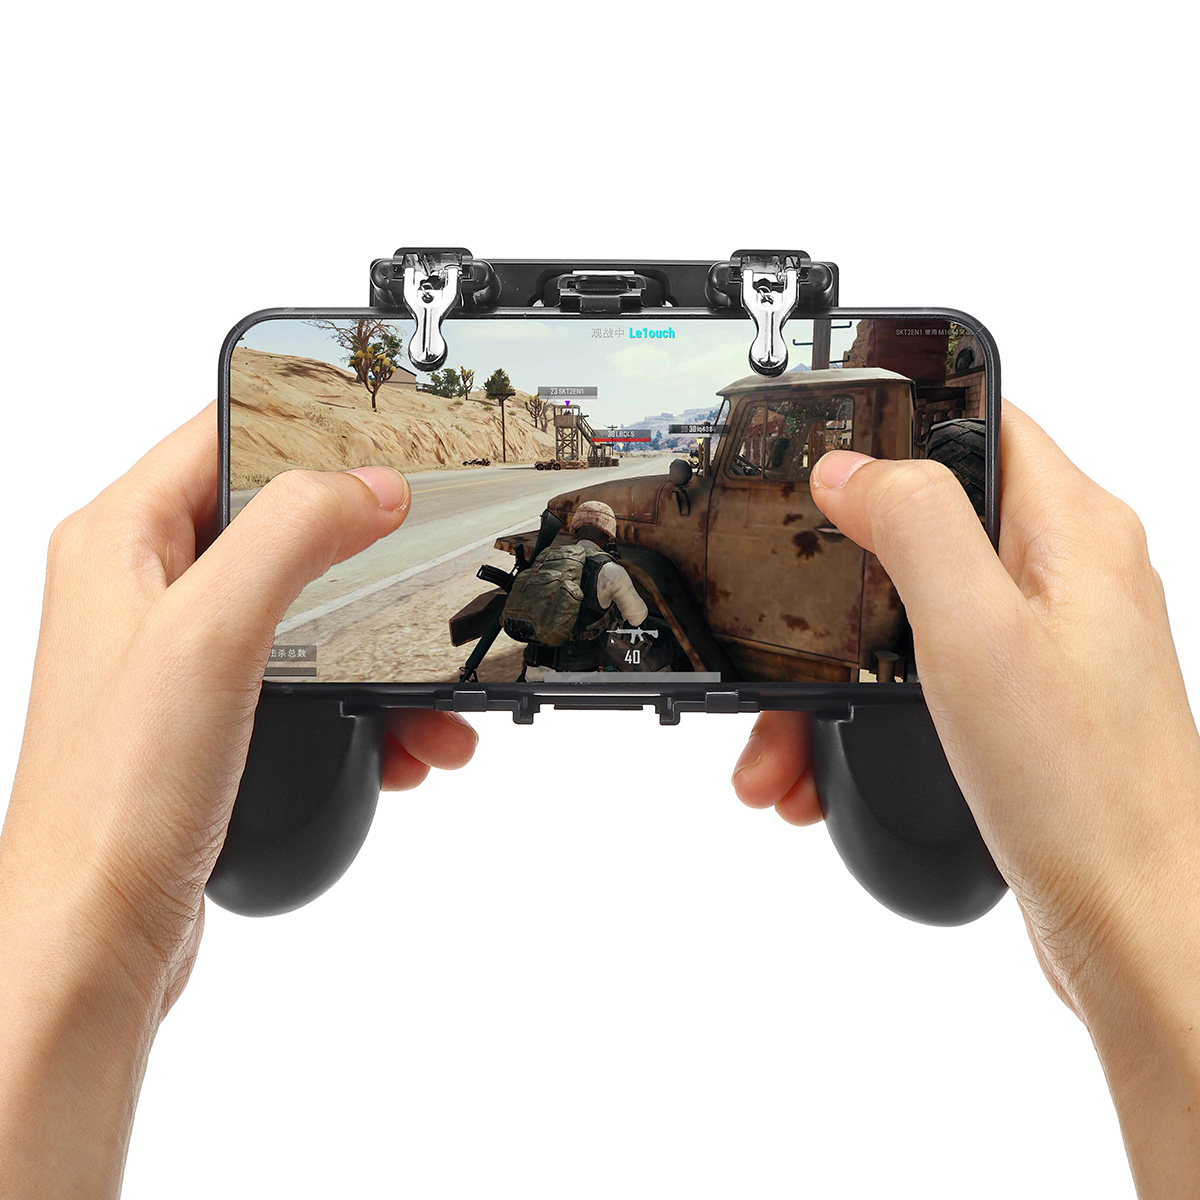 

H1 Gamepad Game Controller Fire Trigger Shooter Button for PUBG Mobile Game for Phone